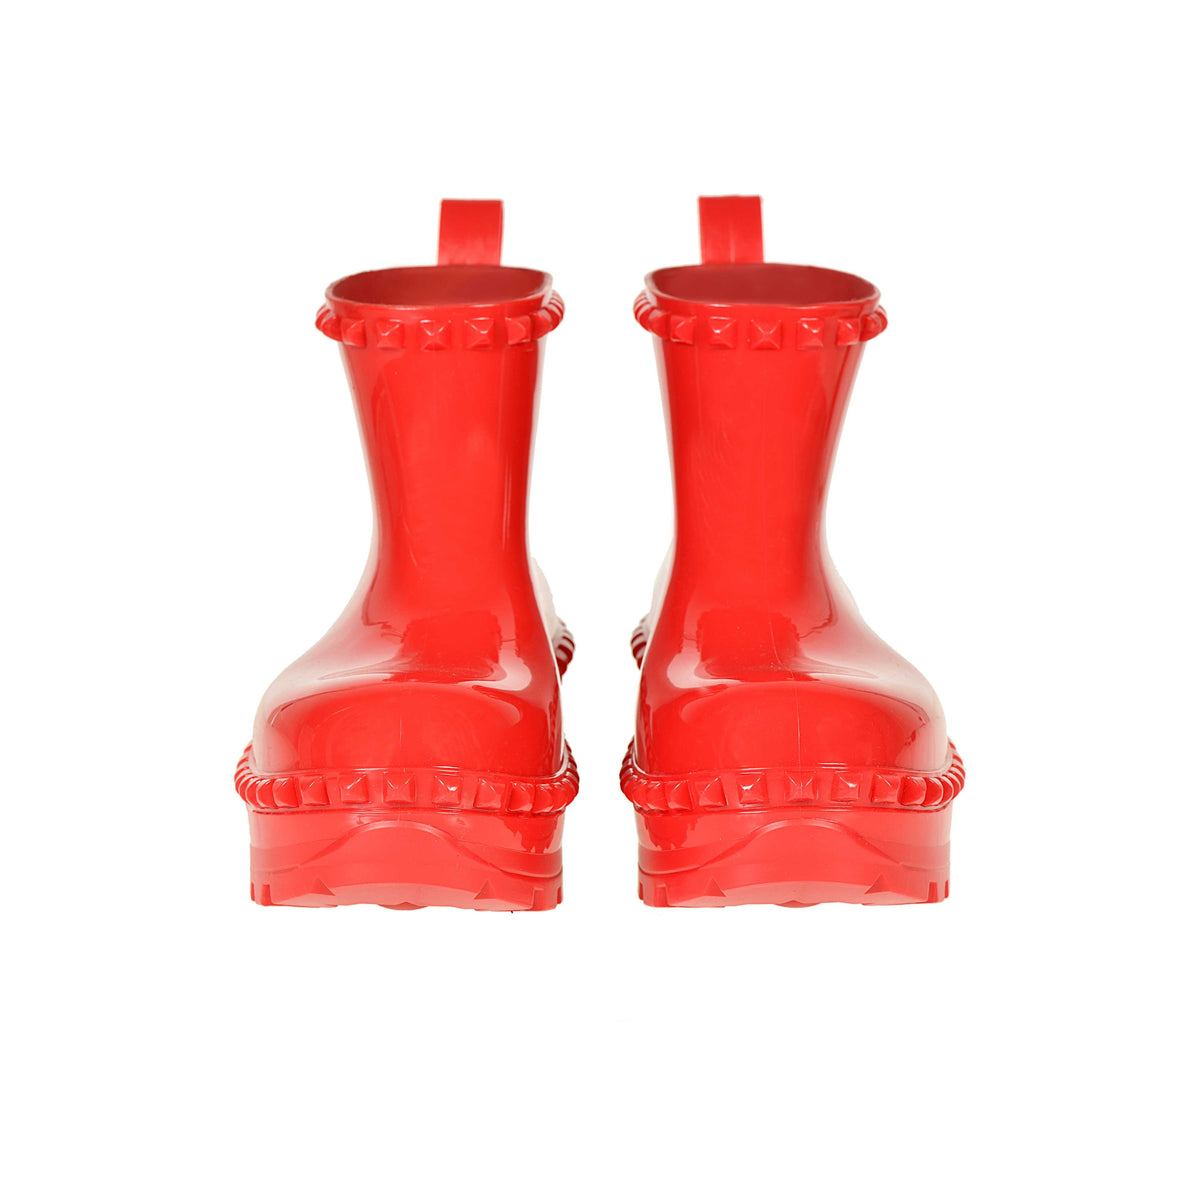 Red Bottega puddle boots perfect for the beach and pool